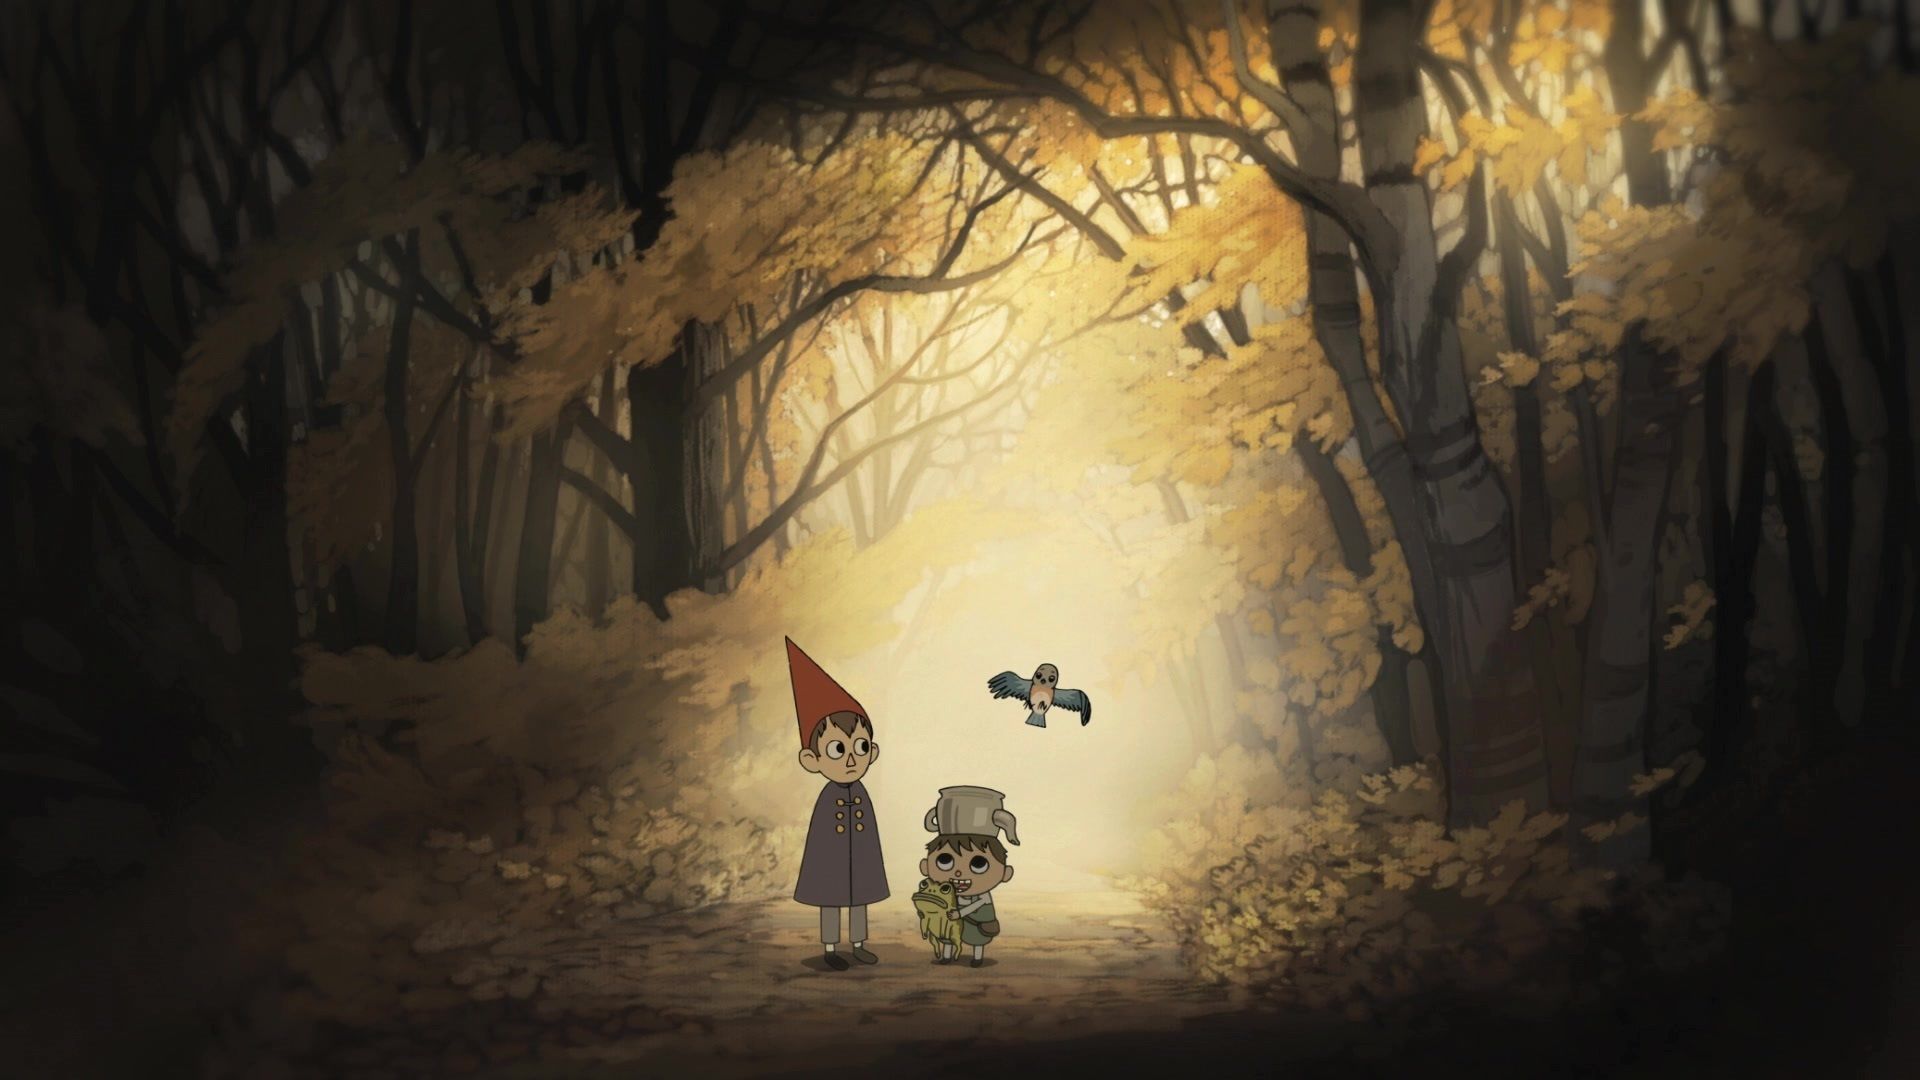 The image shows a scene from the animated television series Over the Garden Wall. - Goblincore